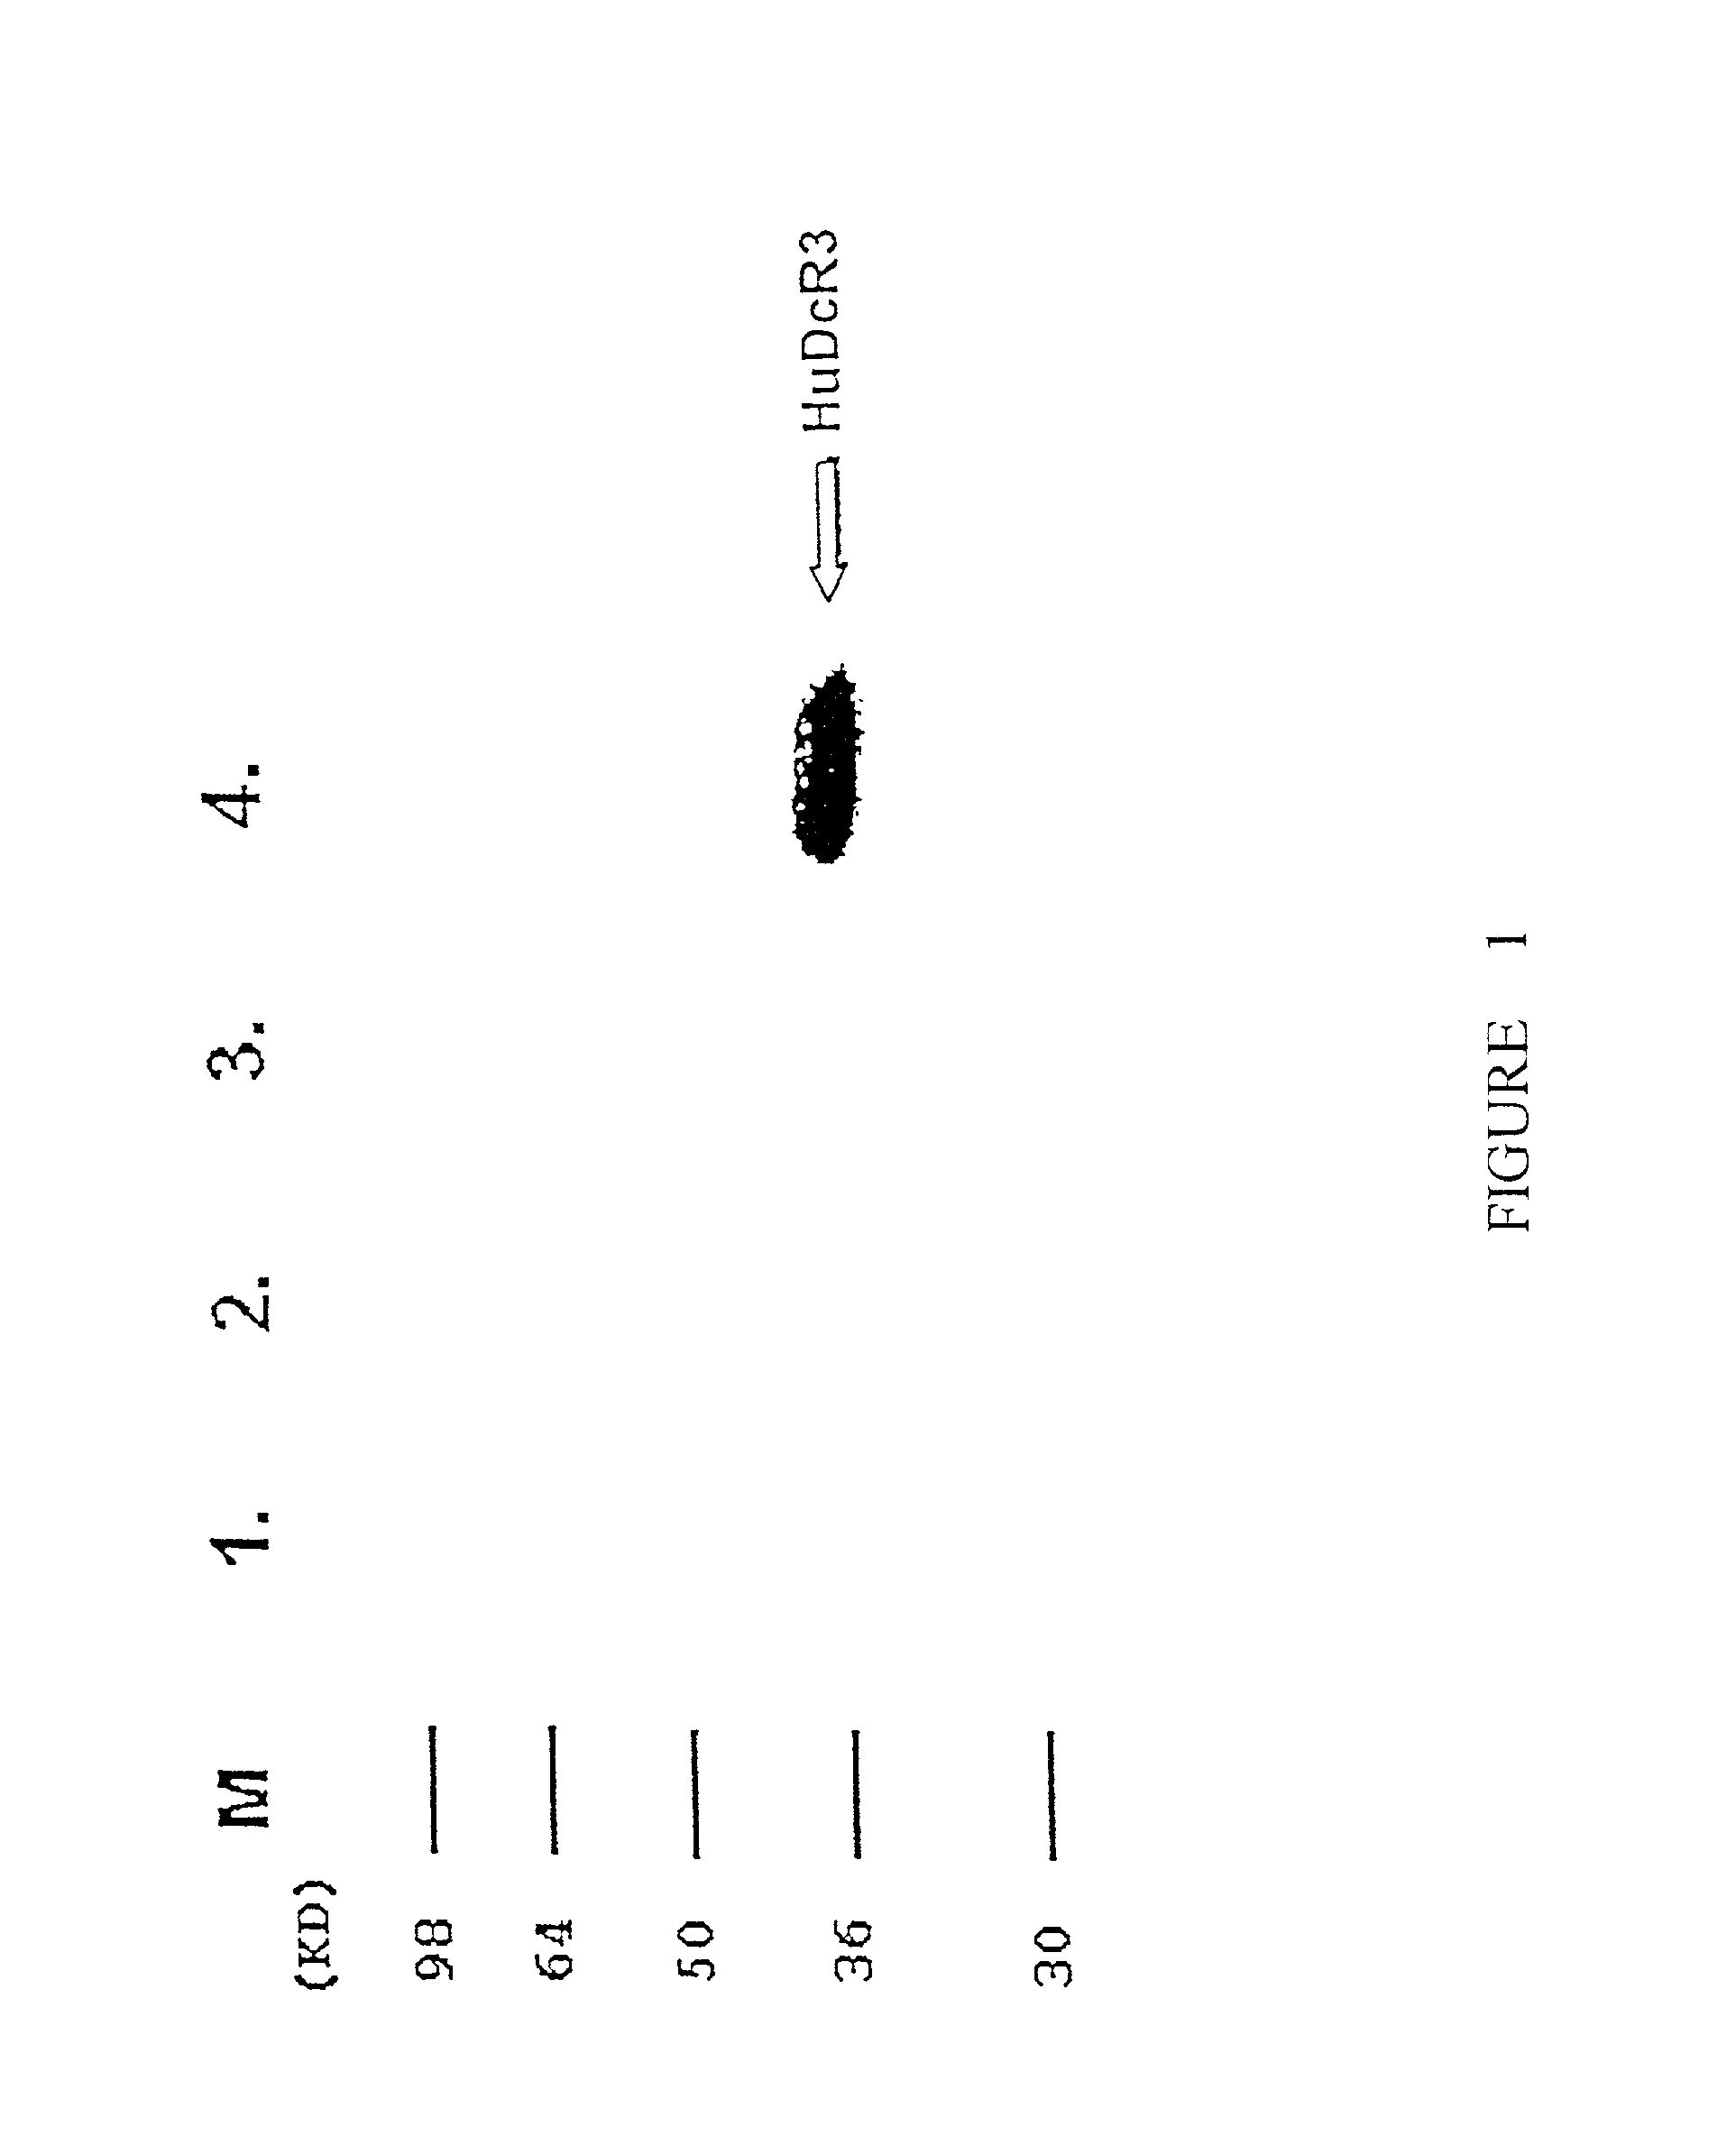 Monoclonal antibodies for the detection of decoy receptor 3, hybridomas producing said antibodies and uses thereof